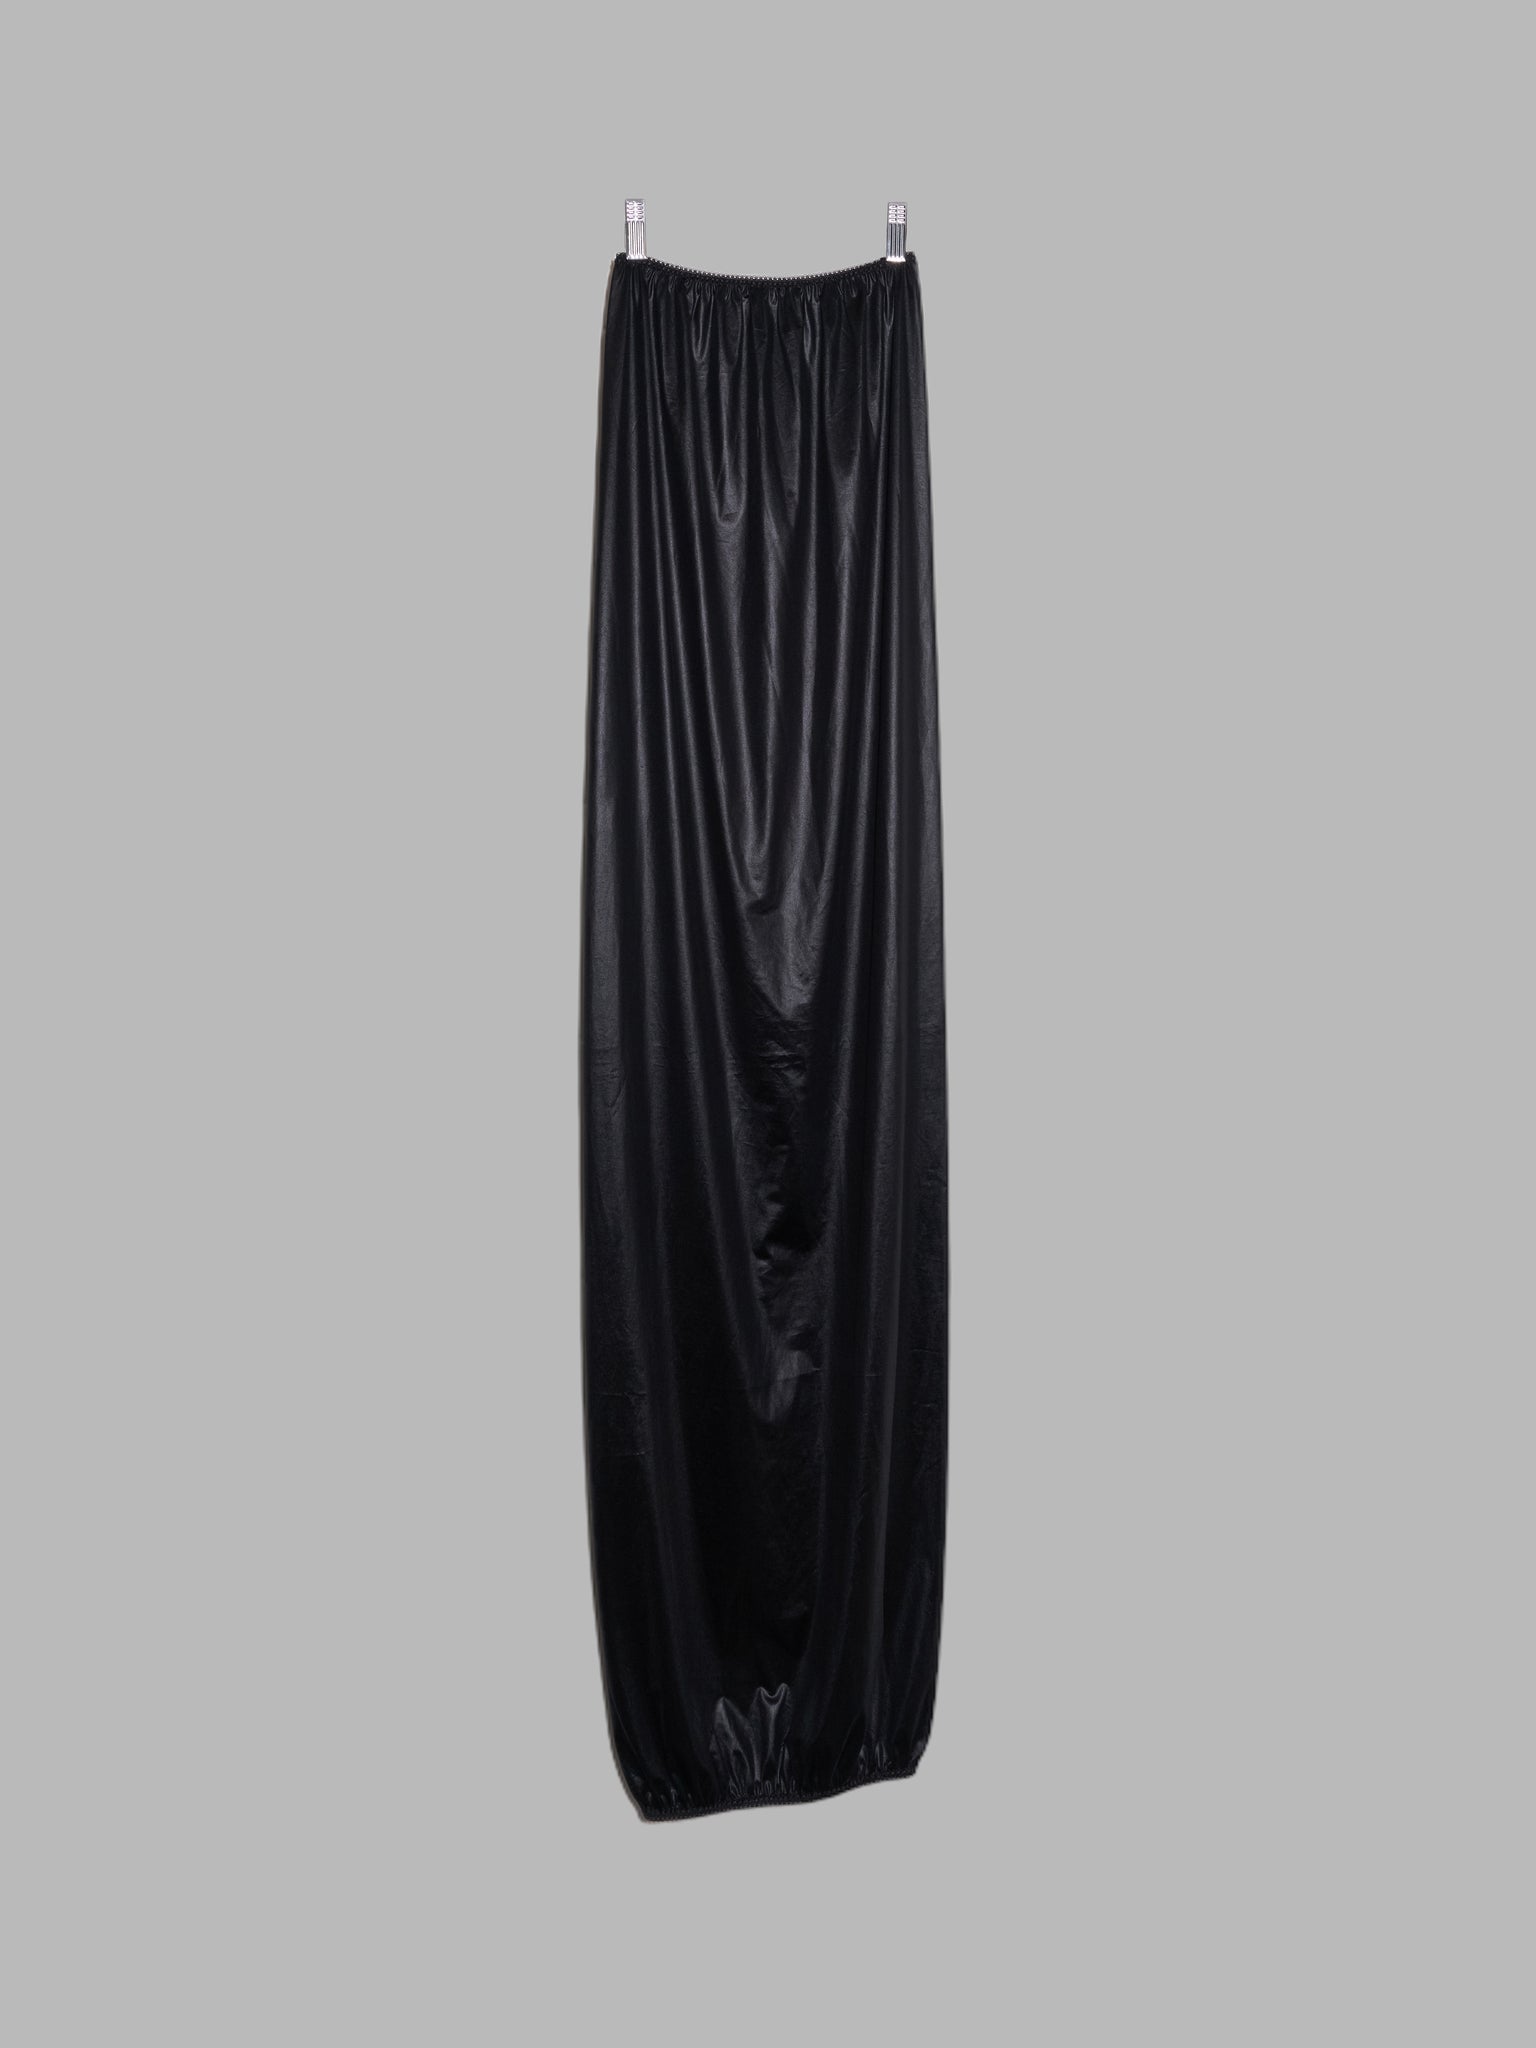 Jean Colonna sheeny black tube dress or double-layered skirt - size 38